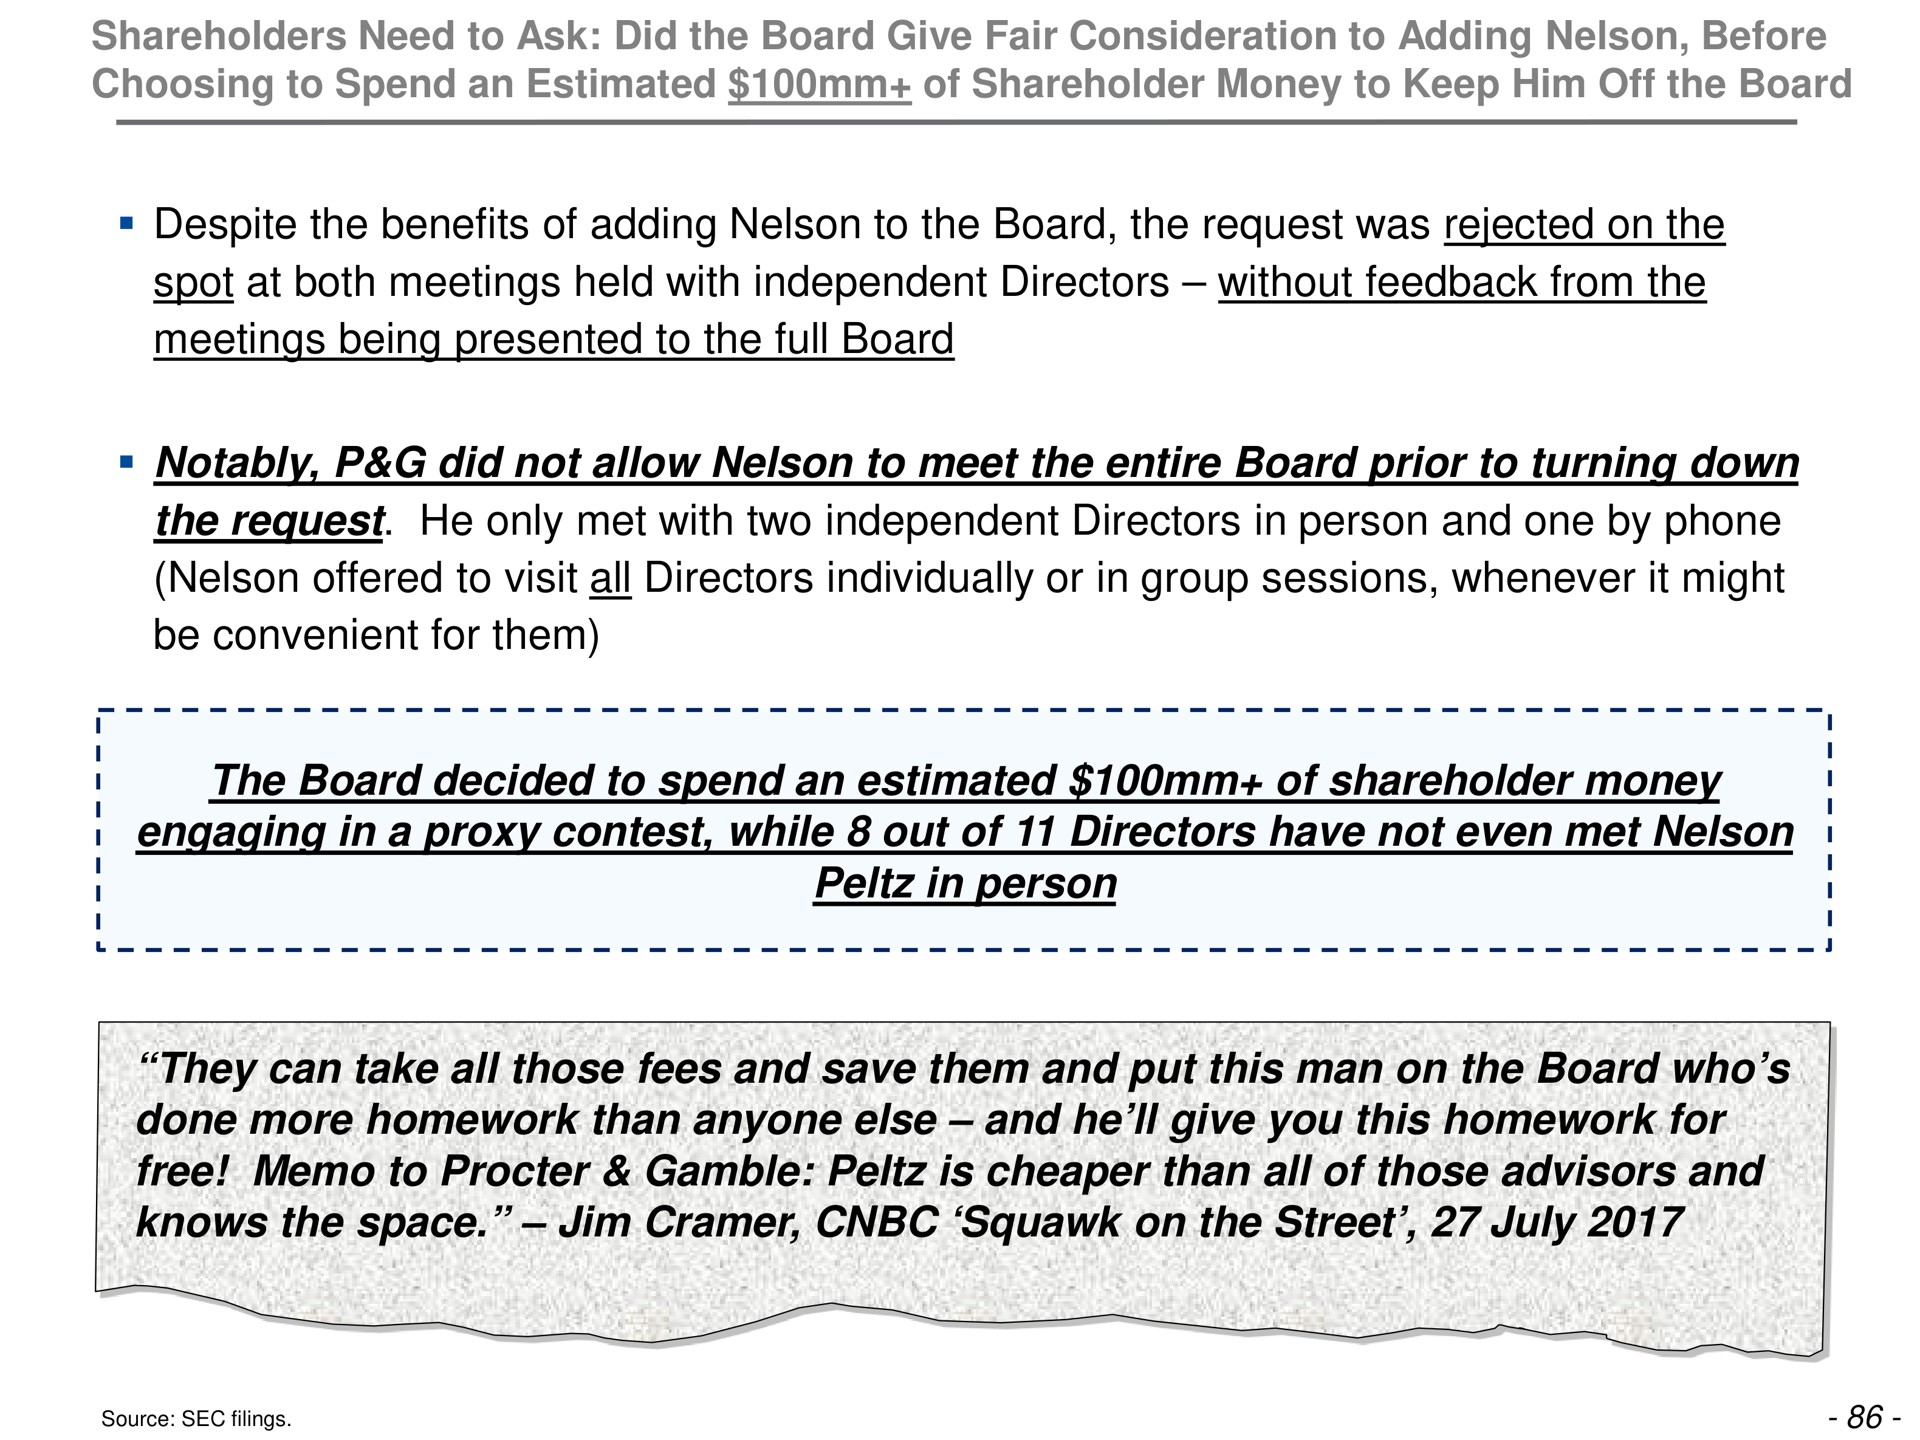 despite the benefits of adding nelson to the board the request was rejected on the spot at both meetings held with independent directors without feedback from the meetings being presented to the full board notably did not allow nelson to meet the entire board prior to turning down the request he only met with two independent directors in person and one by phone nelson offered to visit all directors individually or in group sessions whenever it might be convenient for them the board decided to spend an estimated of shareholder money engaging in a proxy contest while out of directors have not even met nelson in person they can take all those fees and save them and put this man on the board who done more homework than anyone else and he give you this homework for free memo to gamble is than all of those advisors and knows the space squawk on the street source sec filings | Trian Partners